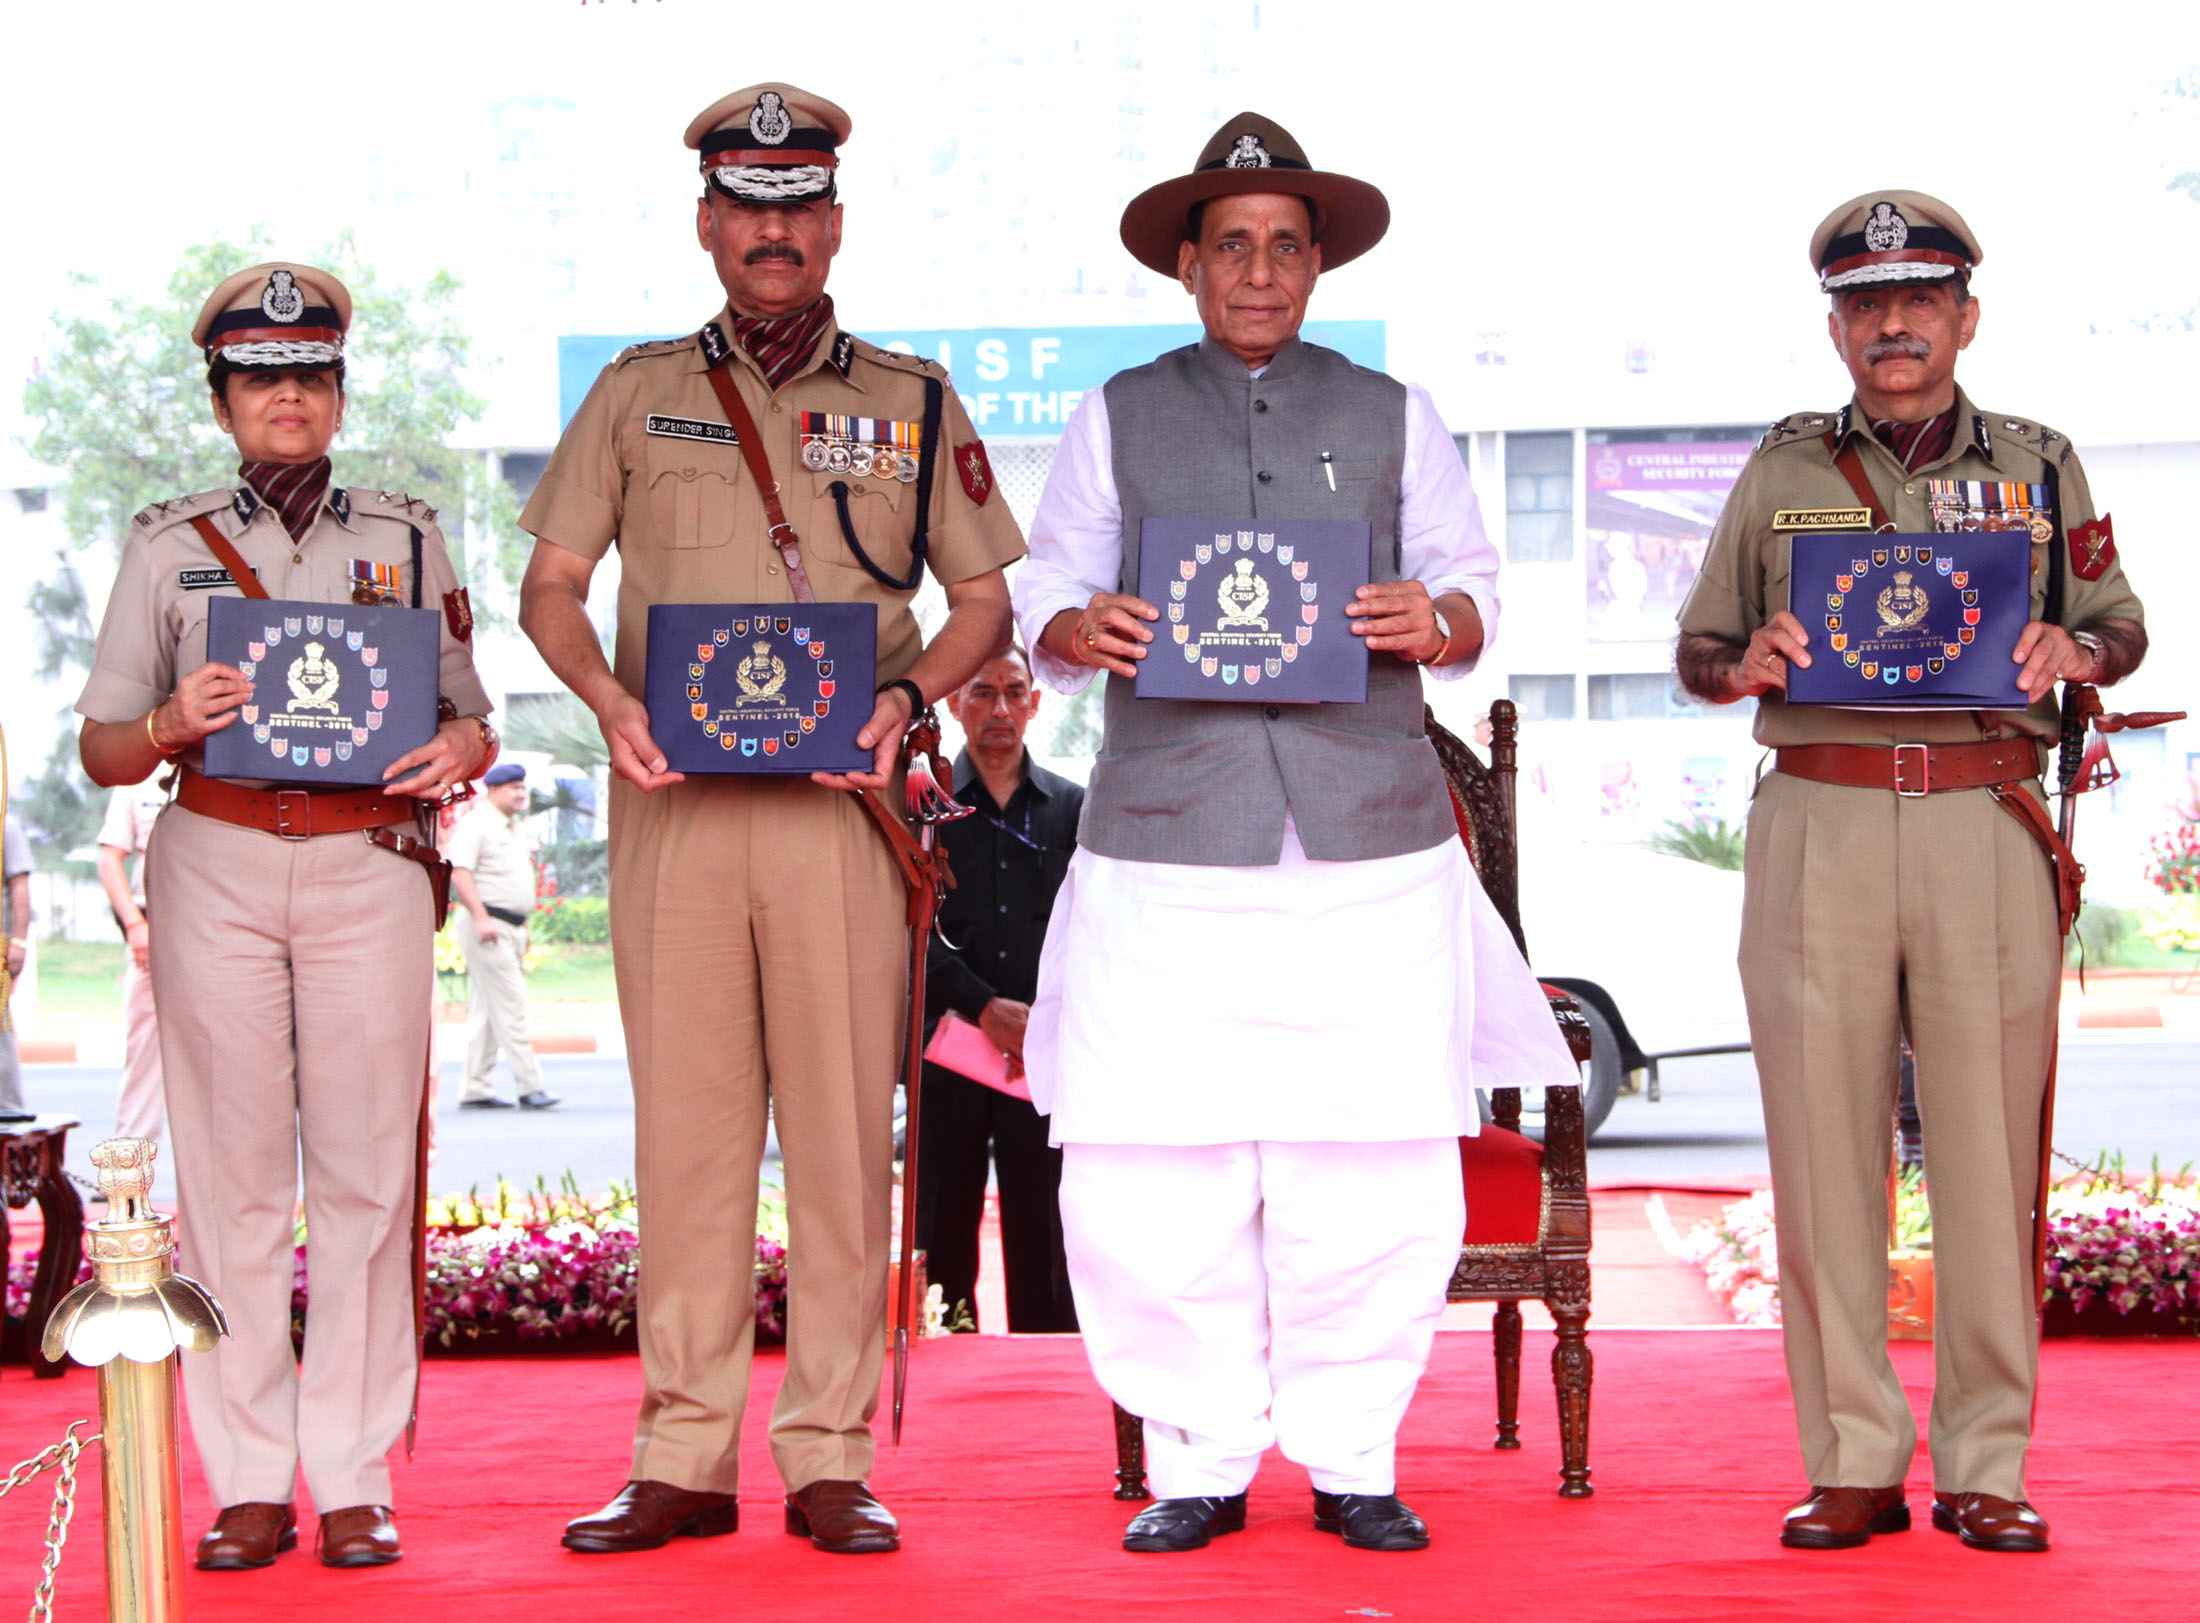 The Union Home Minister, Shri Rajnath Singh releasing the magazine 'Sentinel' at the 47th Raising Day function of the CISF, in Ghaziabad on Friday, March 11, 2016.  The Director General, CISF, Shri Surender Singh is also seen.